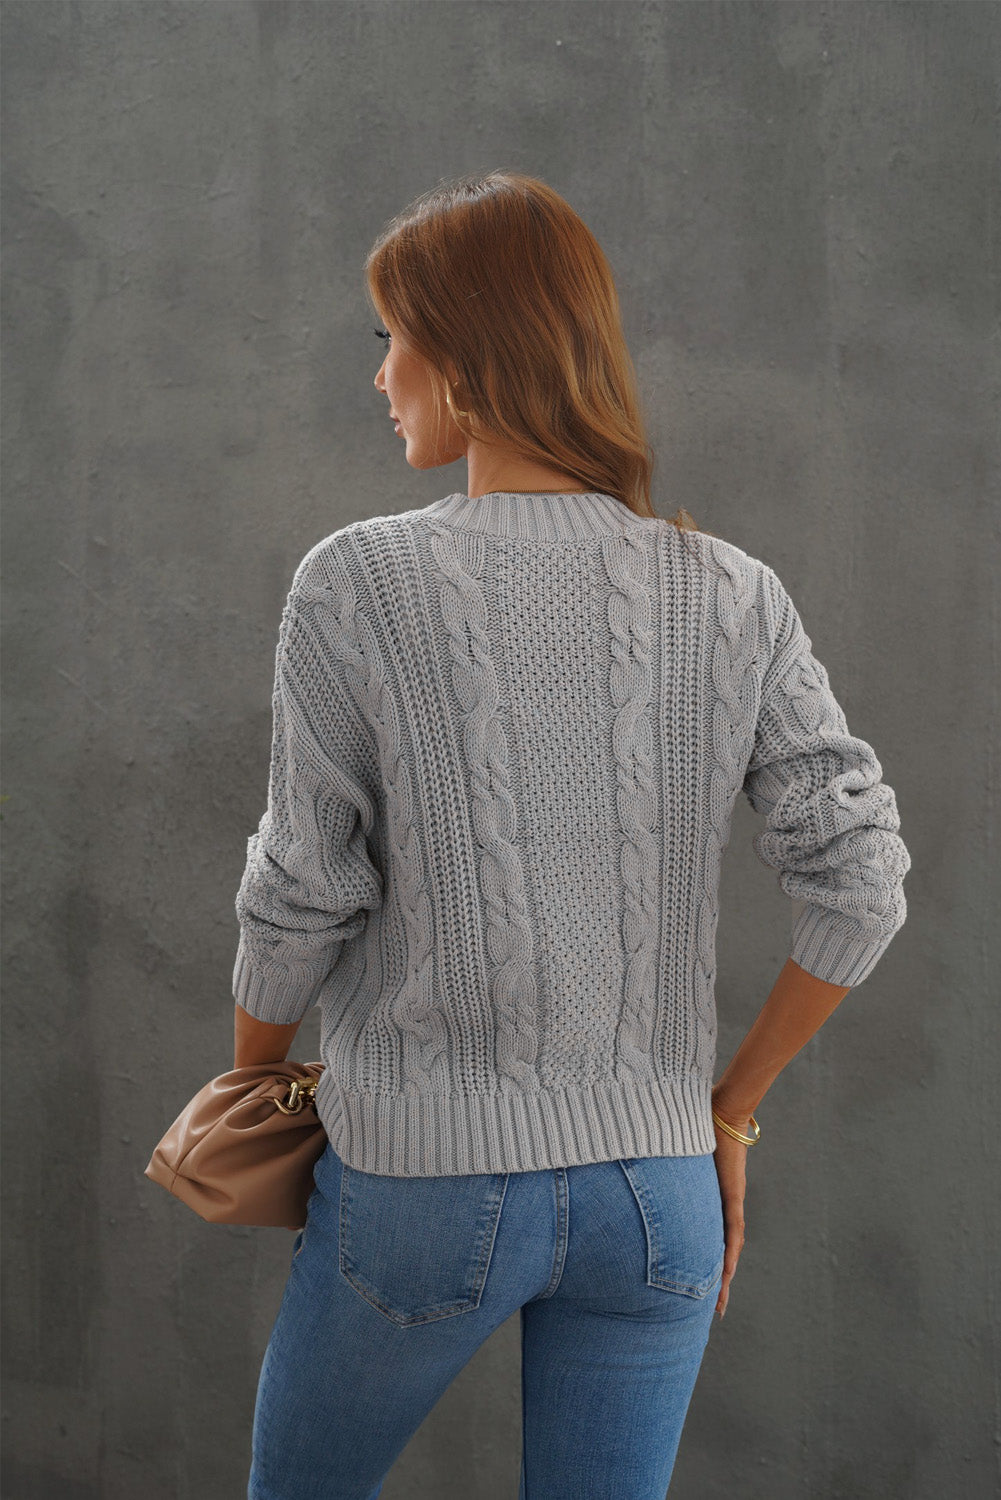 Gray Buttons Weave Knit Cardigan